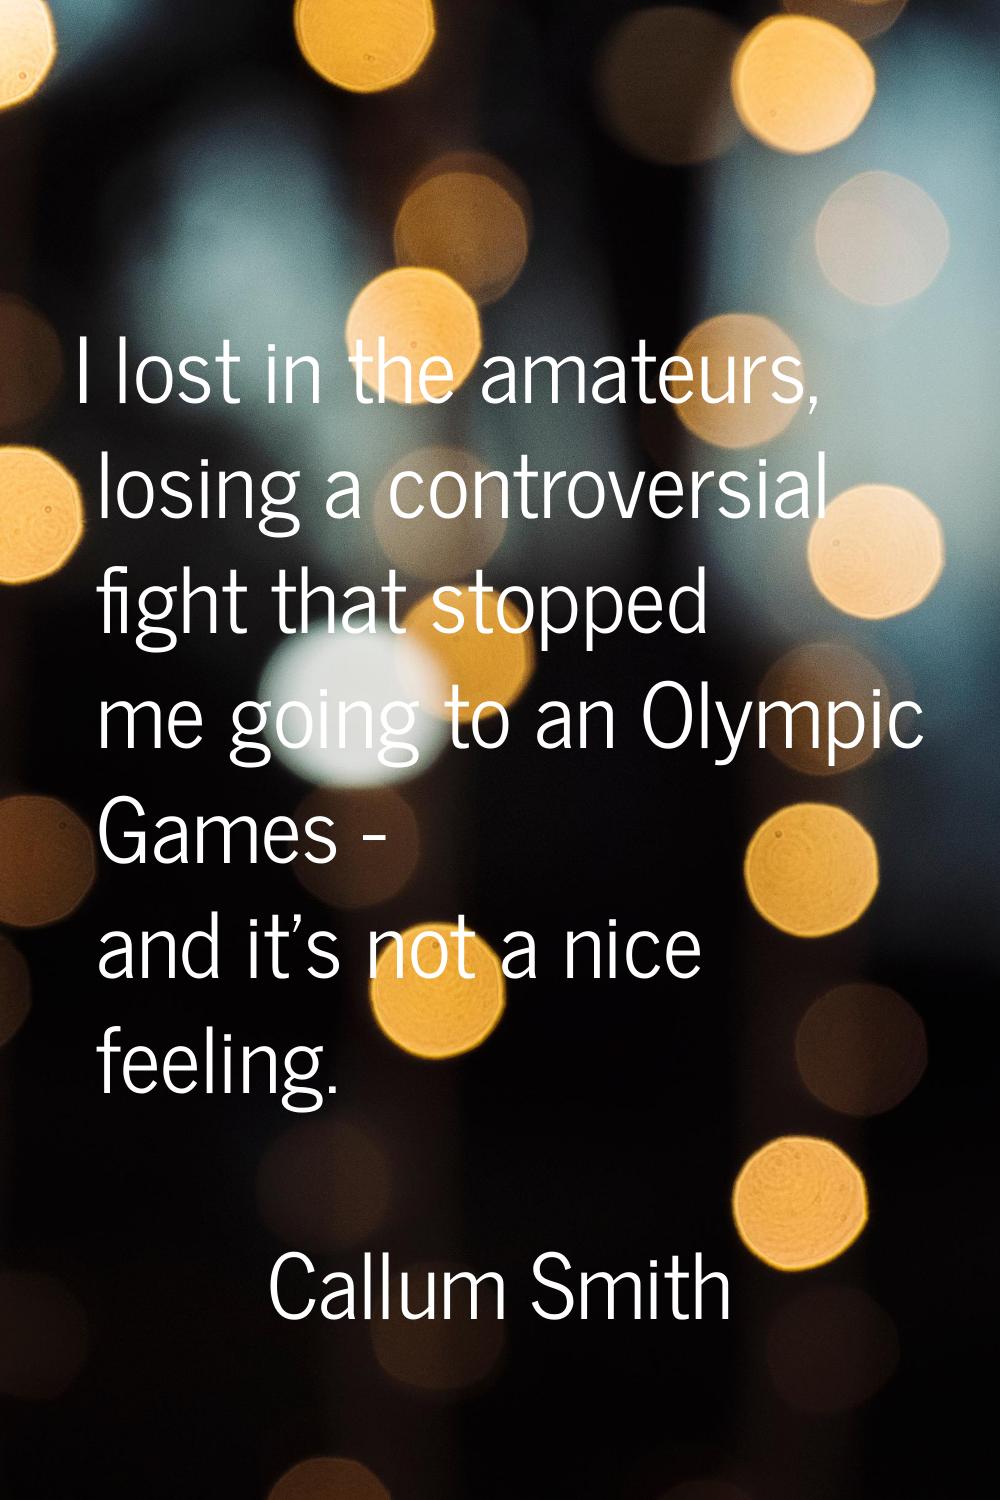 I lost in the amateurs, losing a controversial fight that stopped me going to an Olympic Games - an